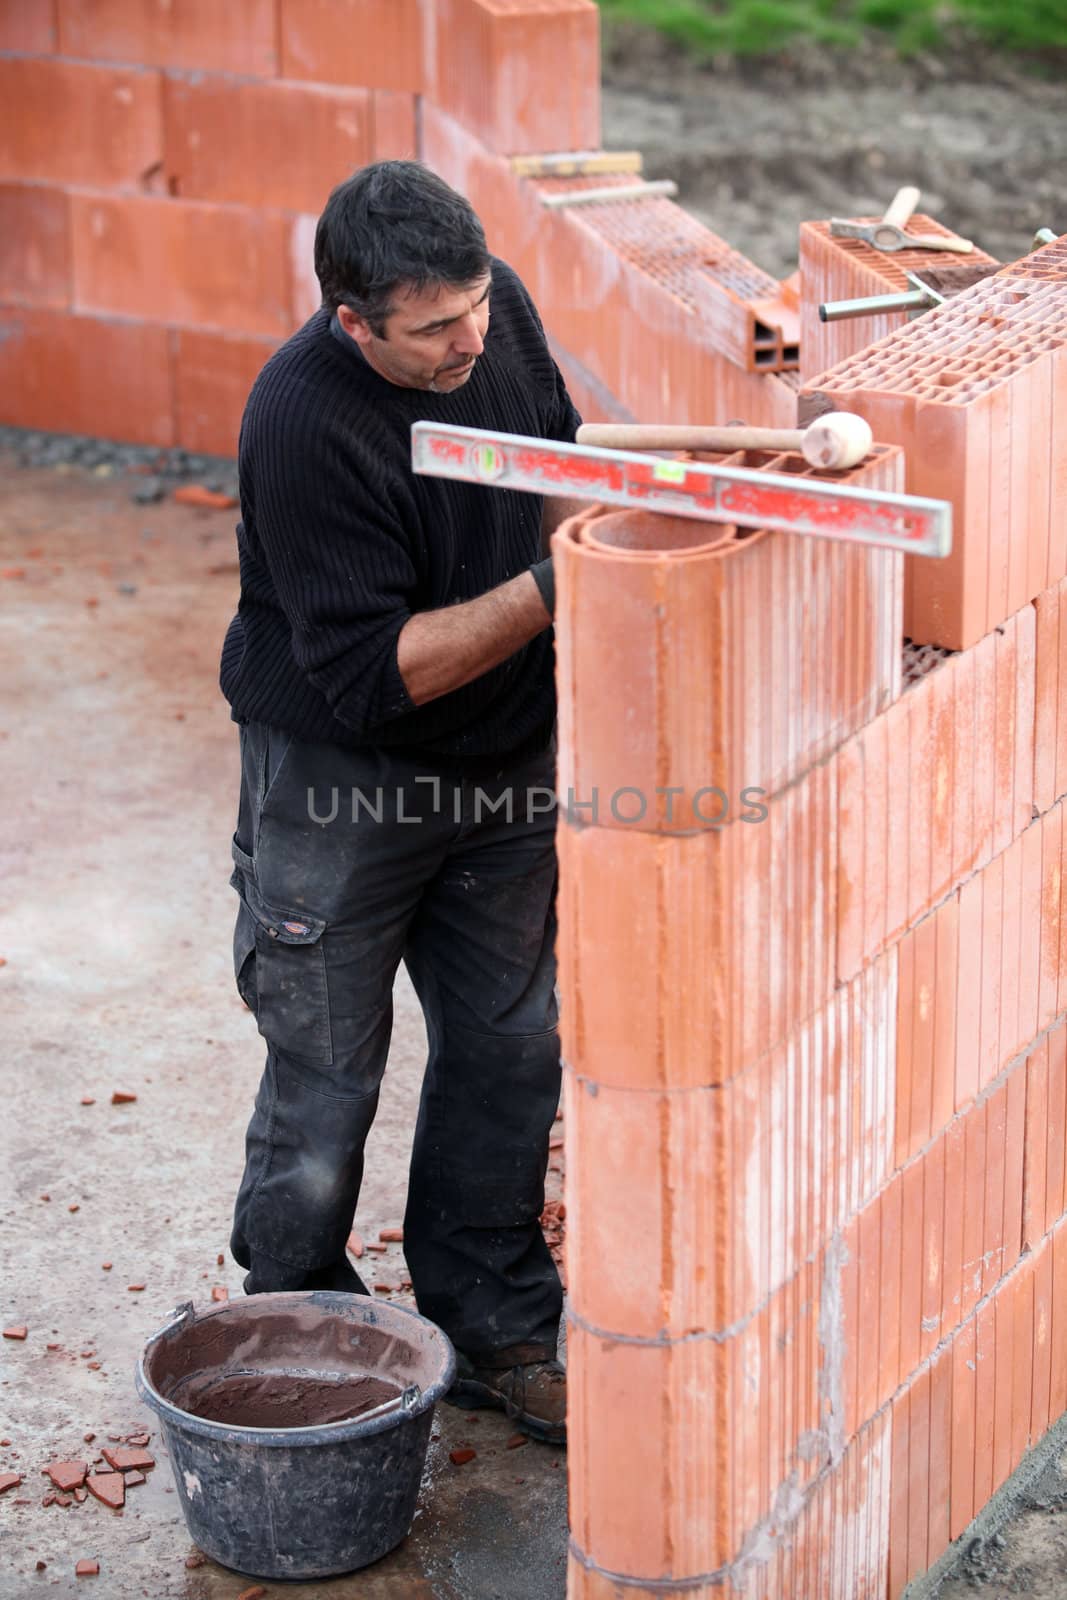 Mason working on site alone by phovoir